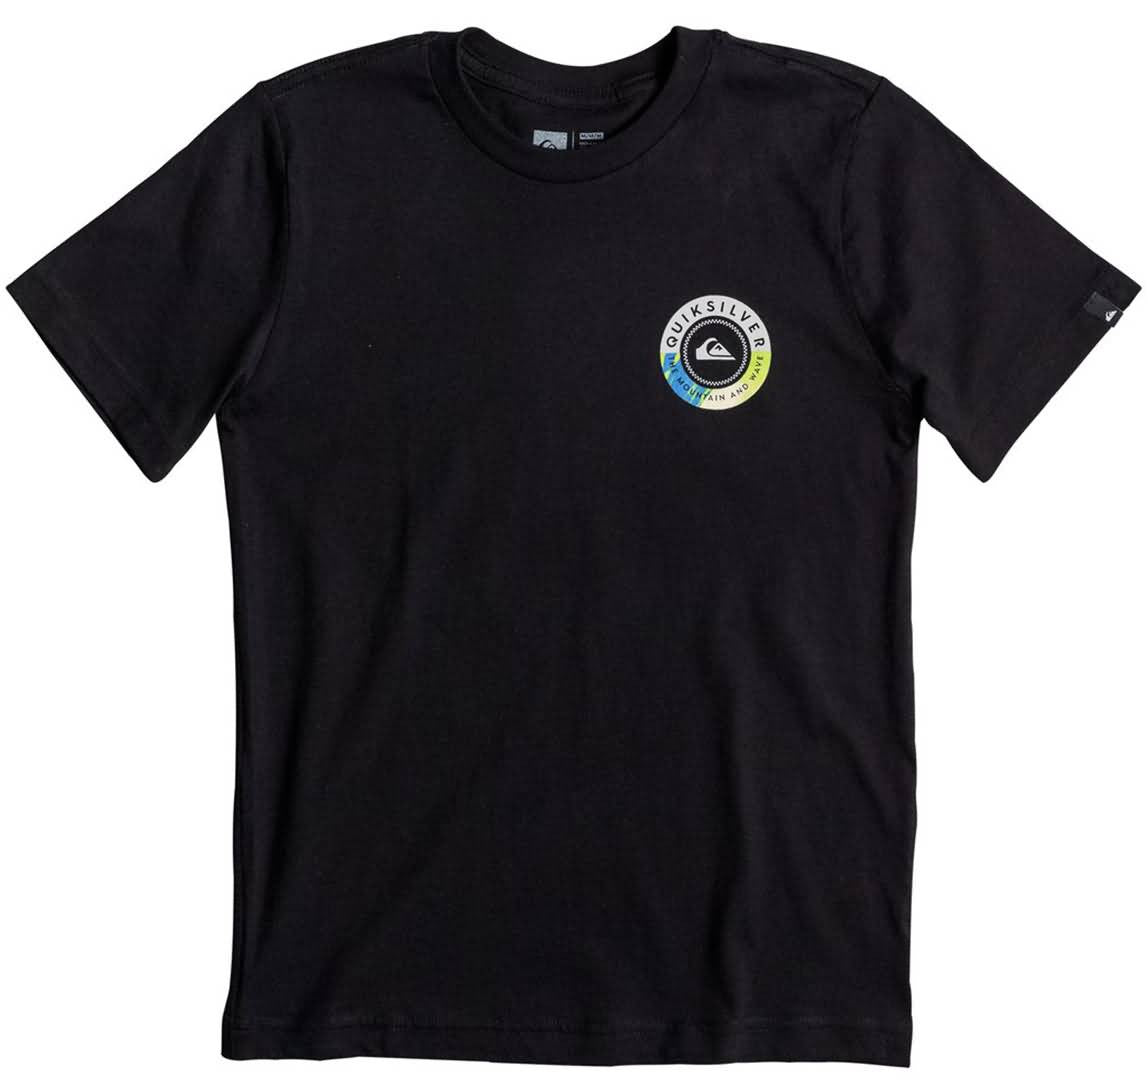 Quiksilver Summer 2017 Apparel | Youth Boys Lifestyle Tees